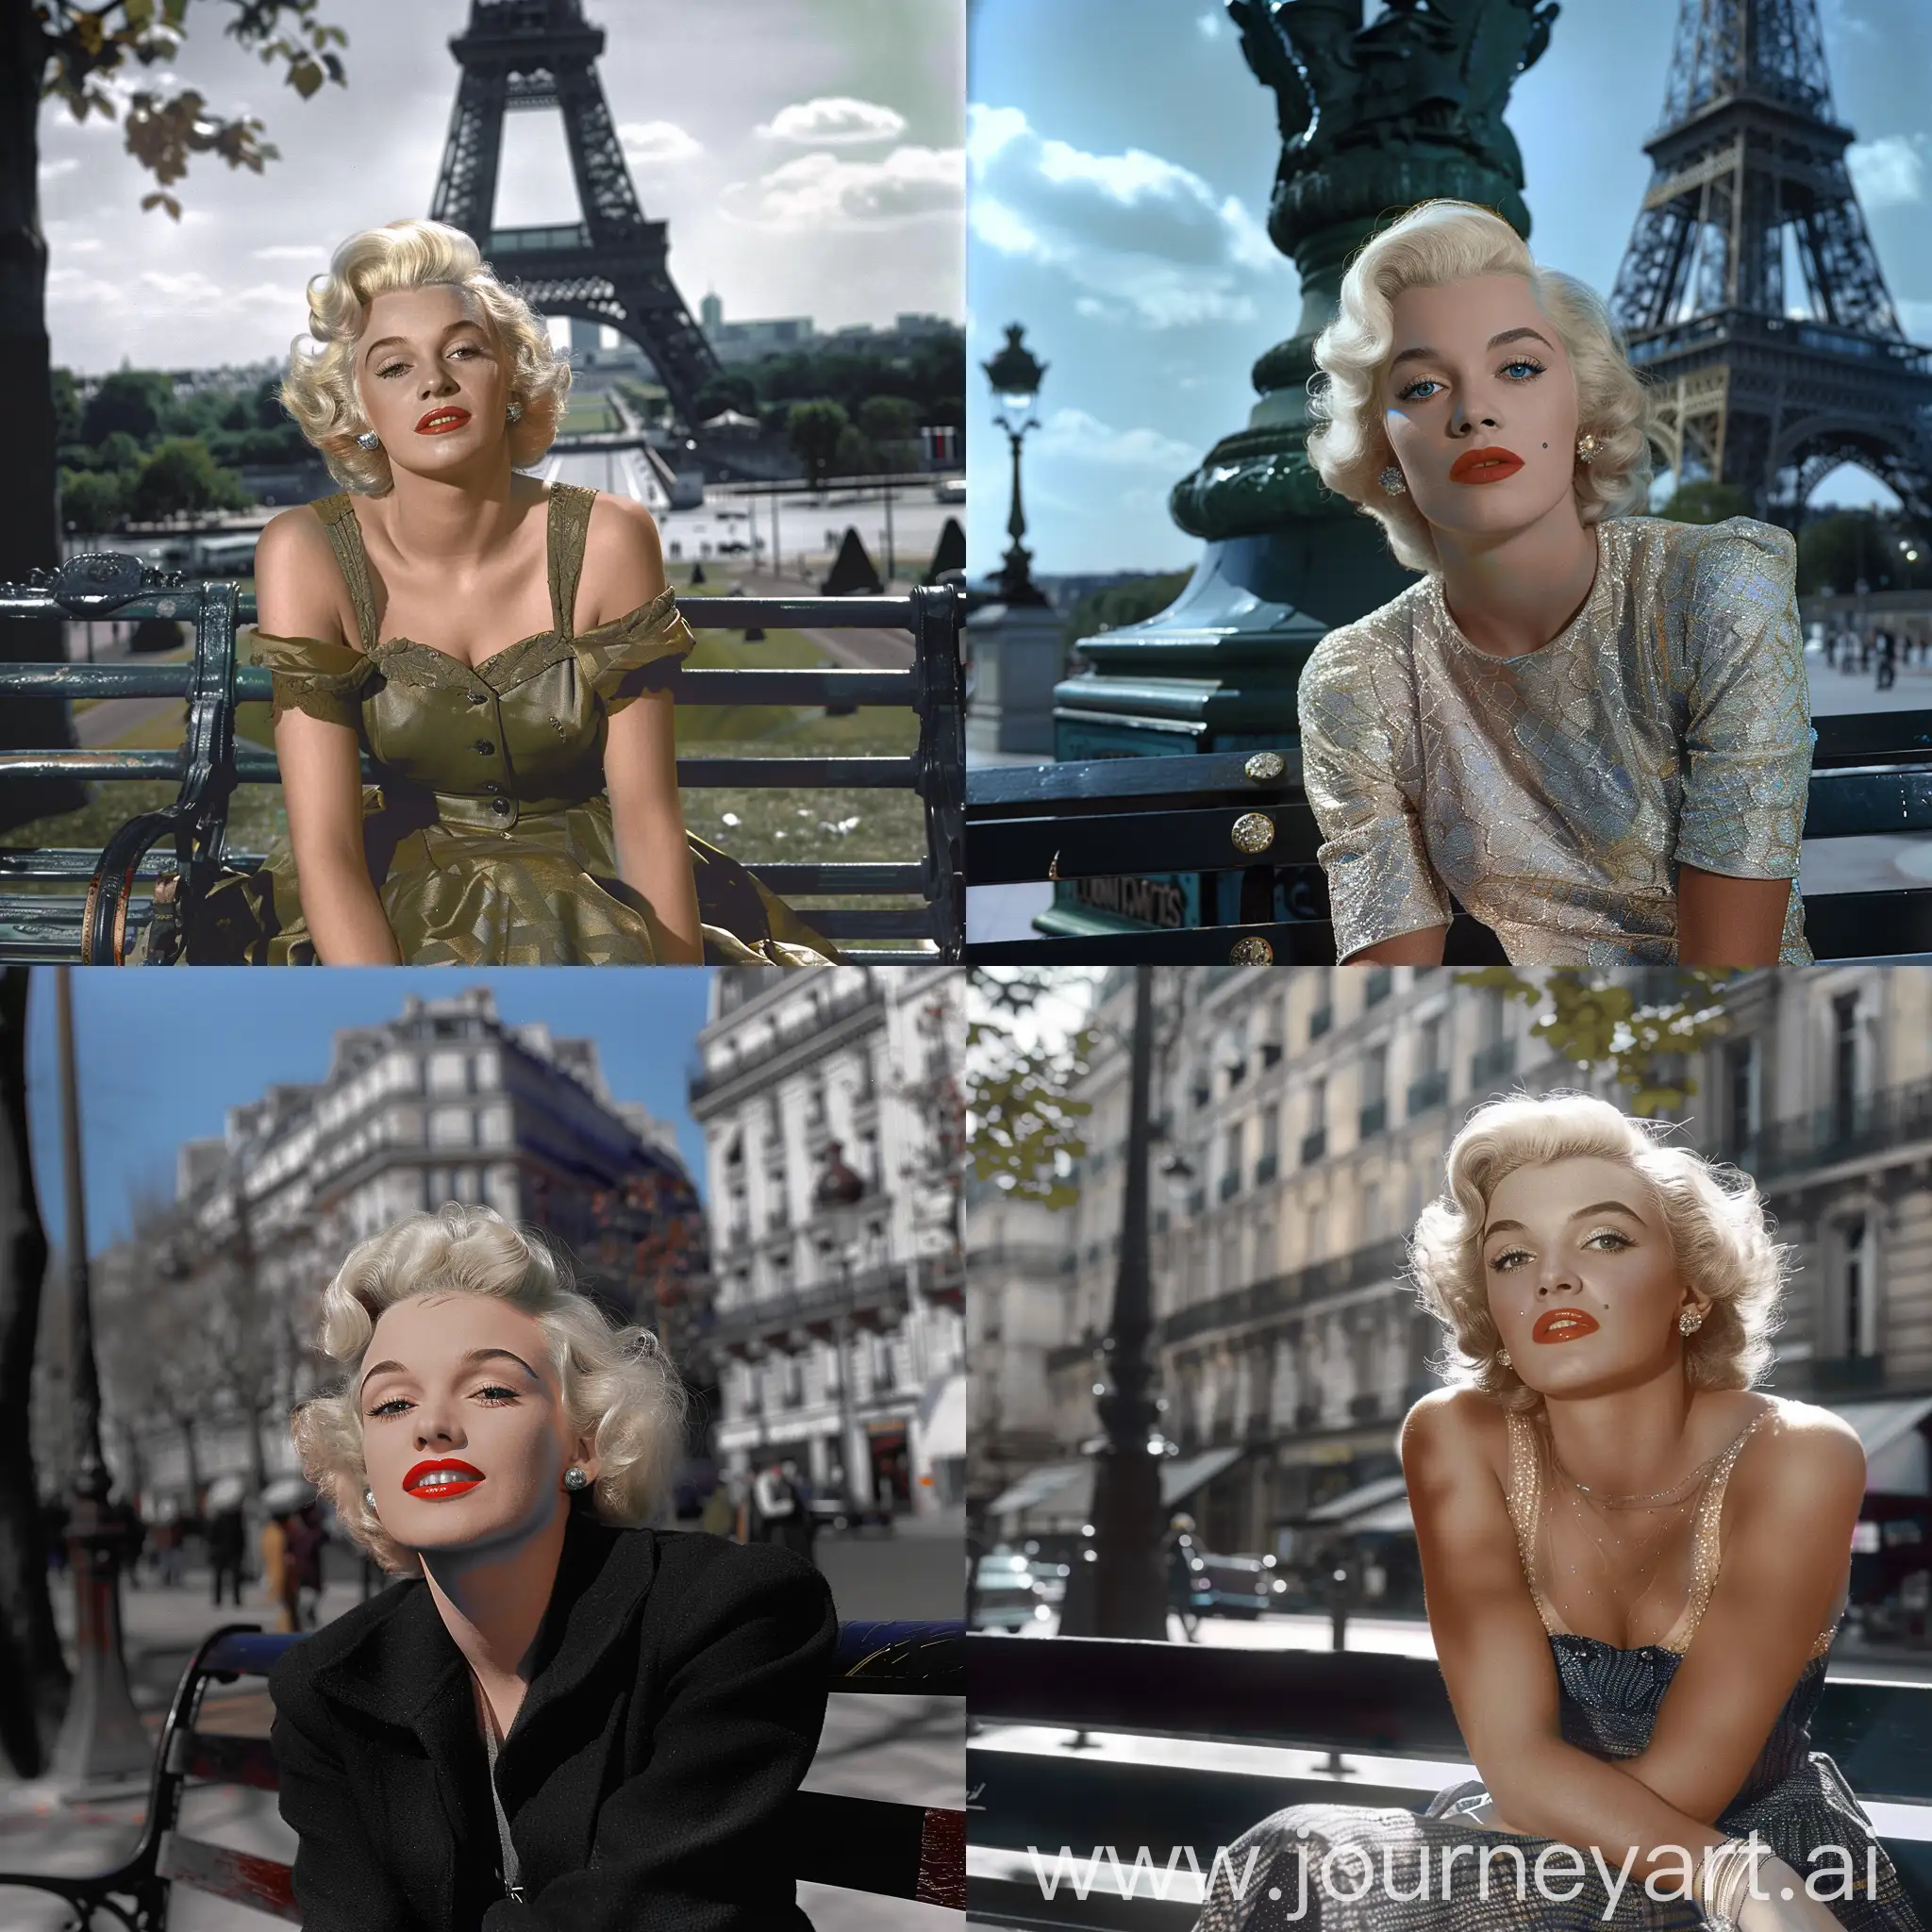 Marilyn Monroe on a Parisian bench, face detailed, colorized 